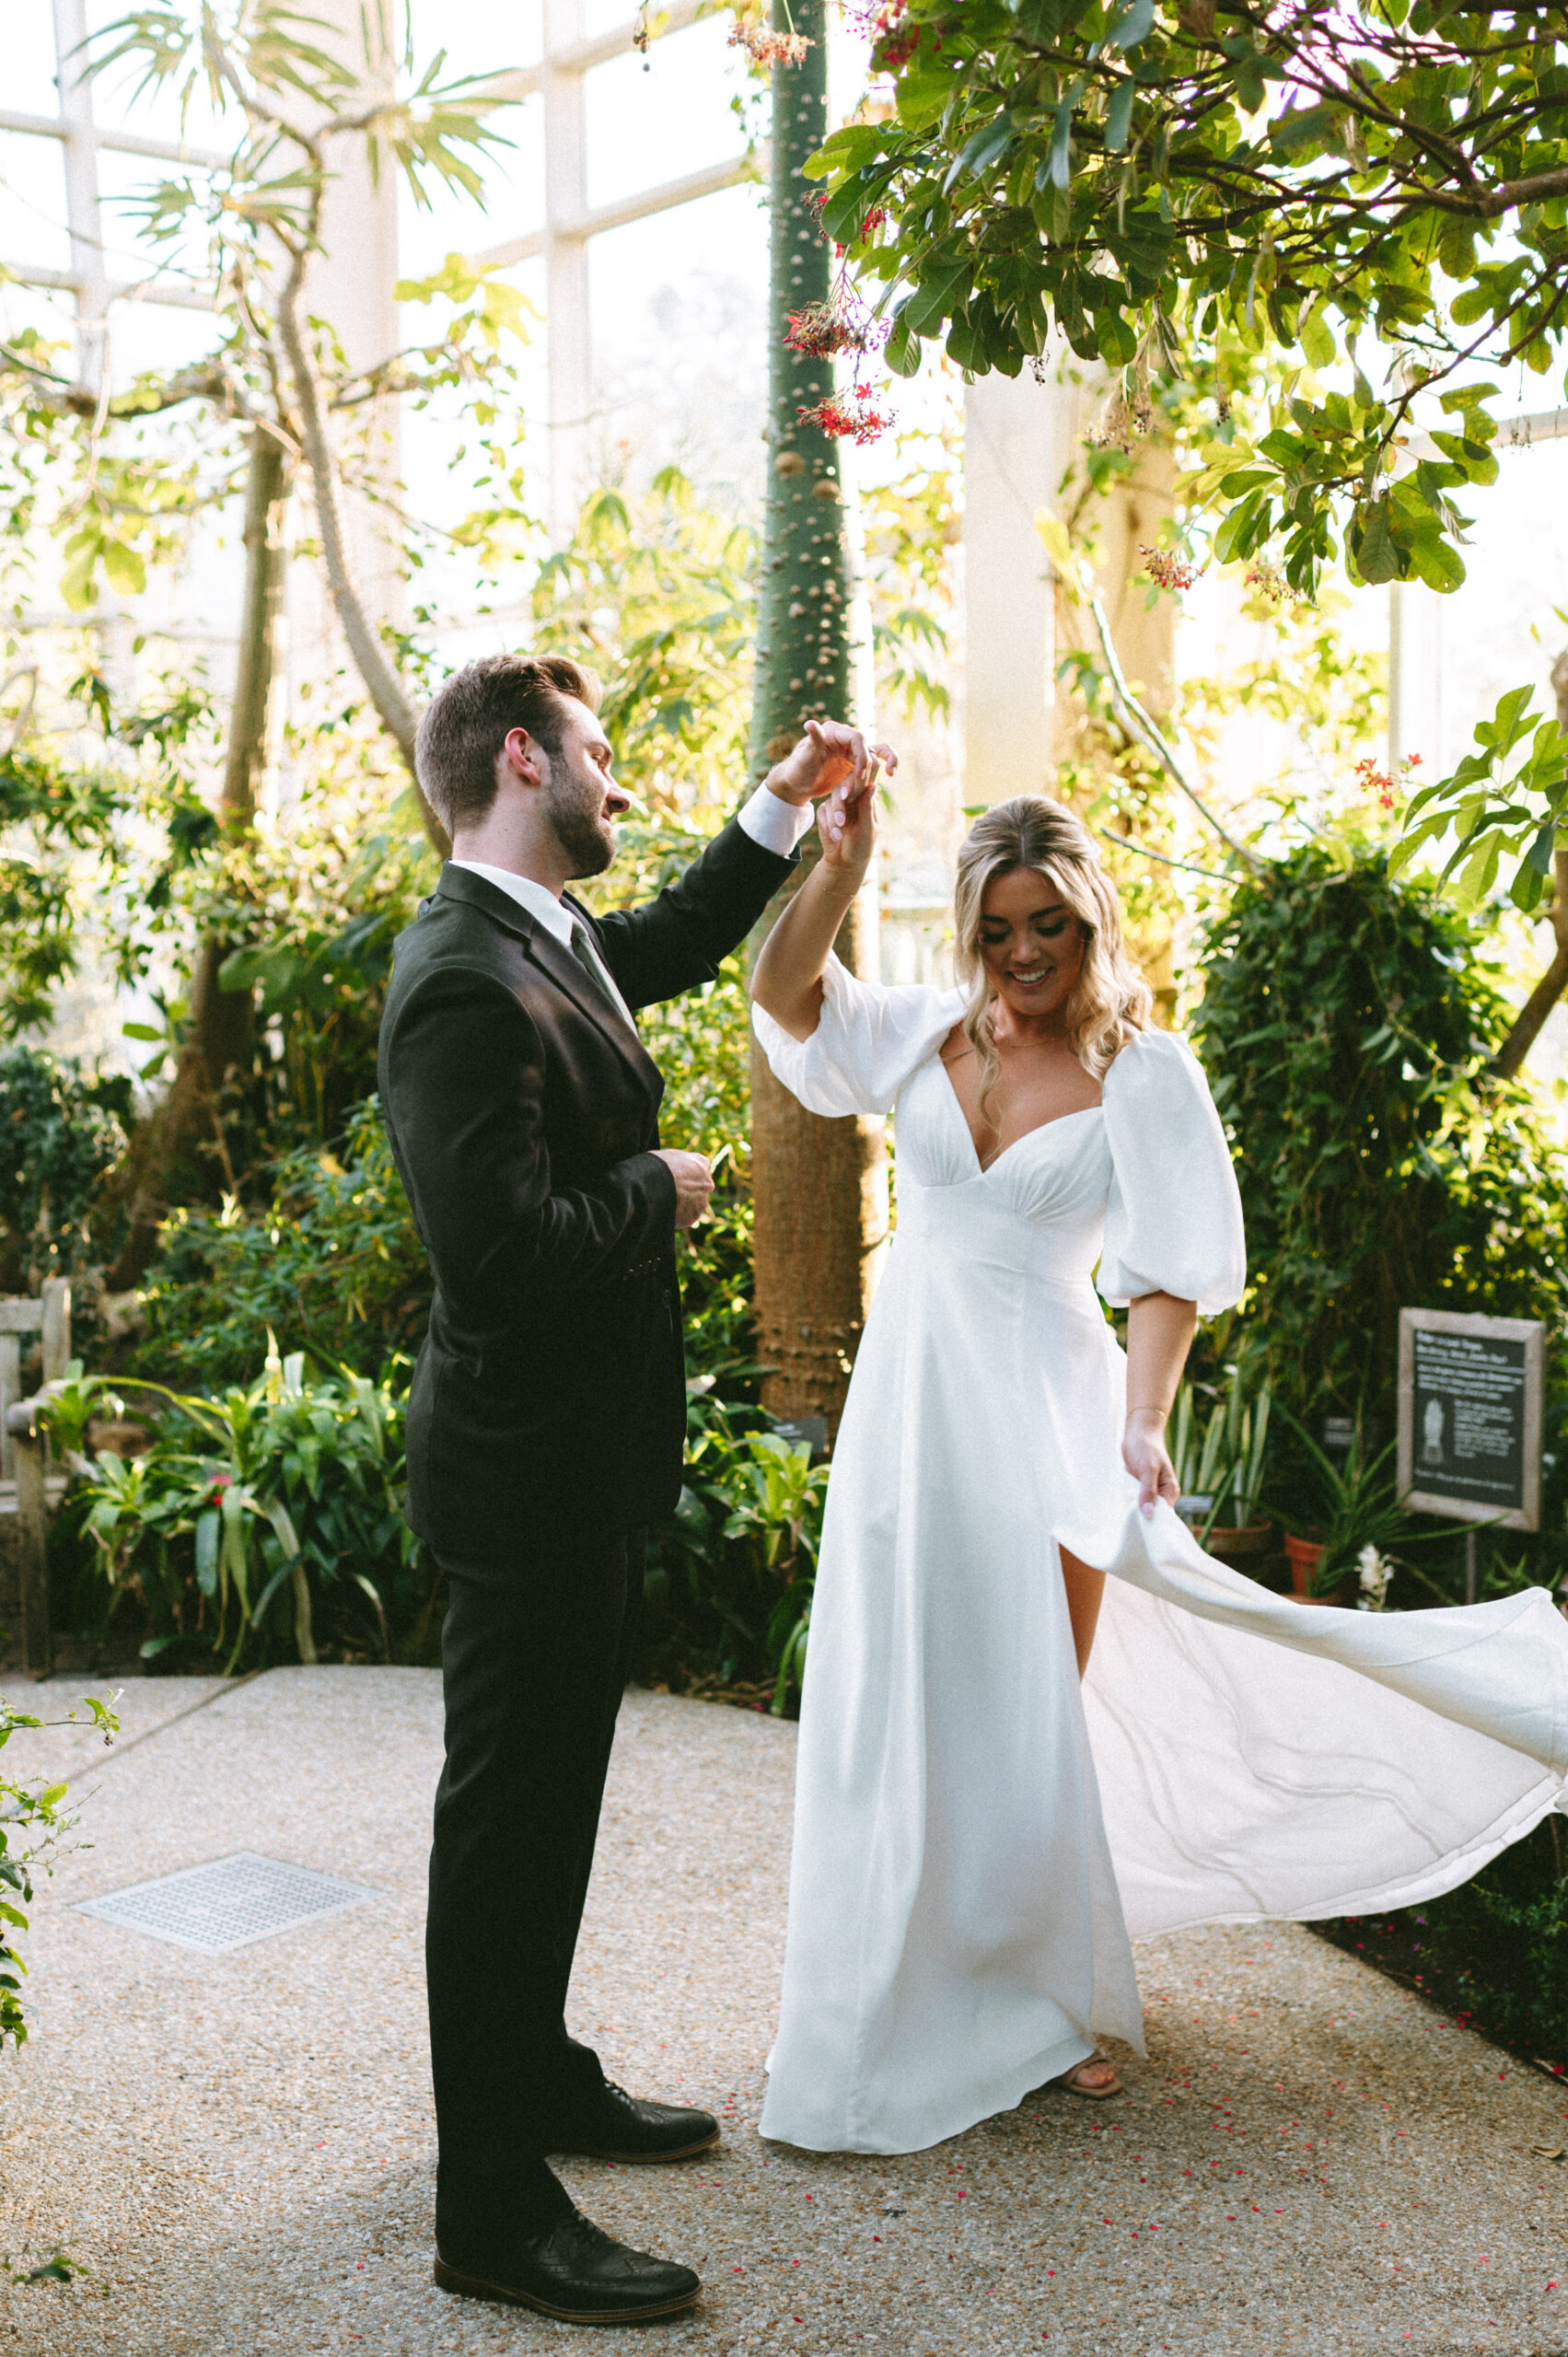 Groom holding bride's hand as she twirls her dress, surrounded by greenery